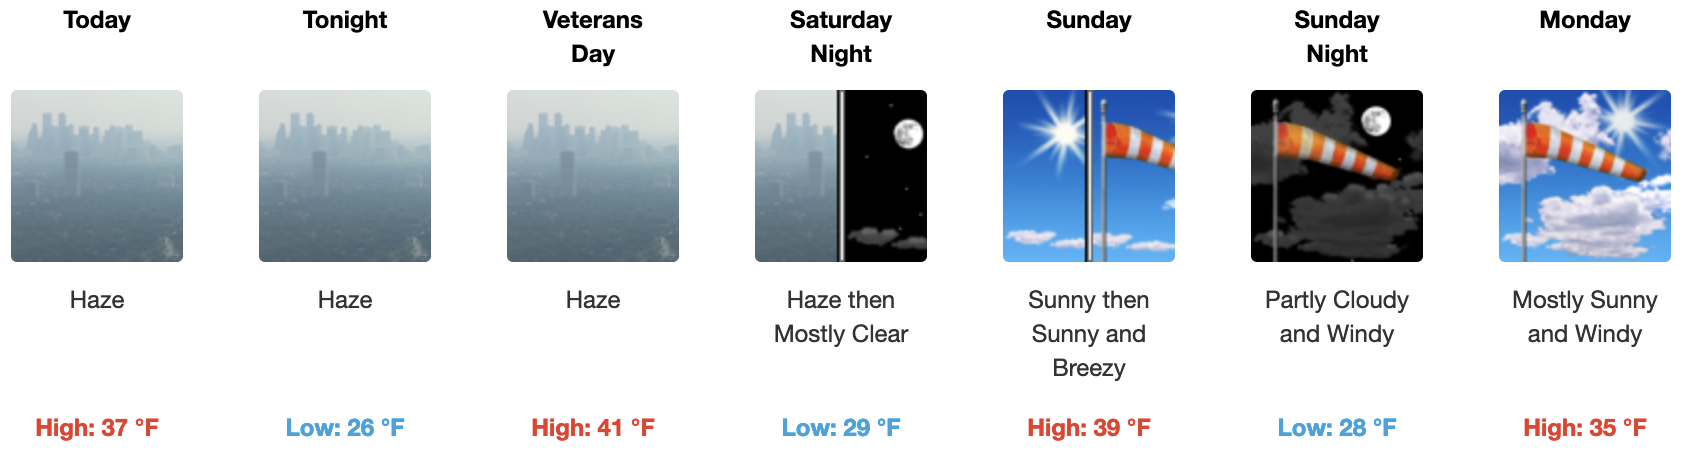 Forecast for MC Coy Station at the Mammoth Mountain Ski Area